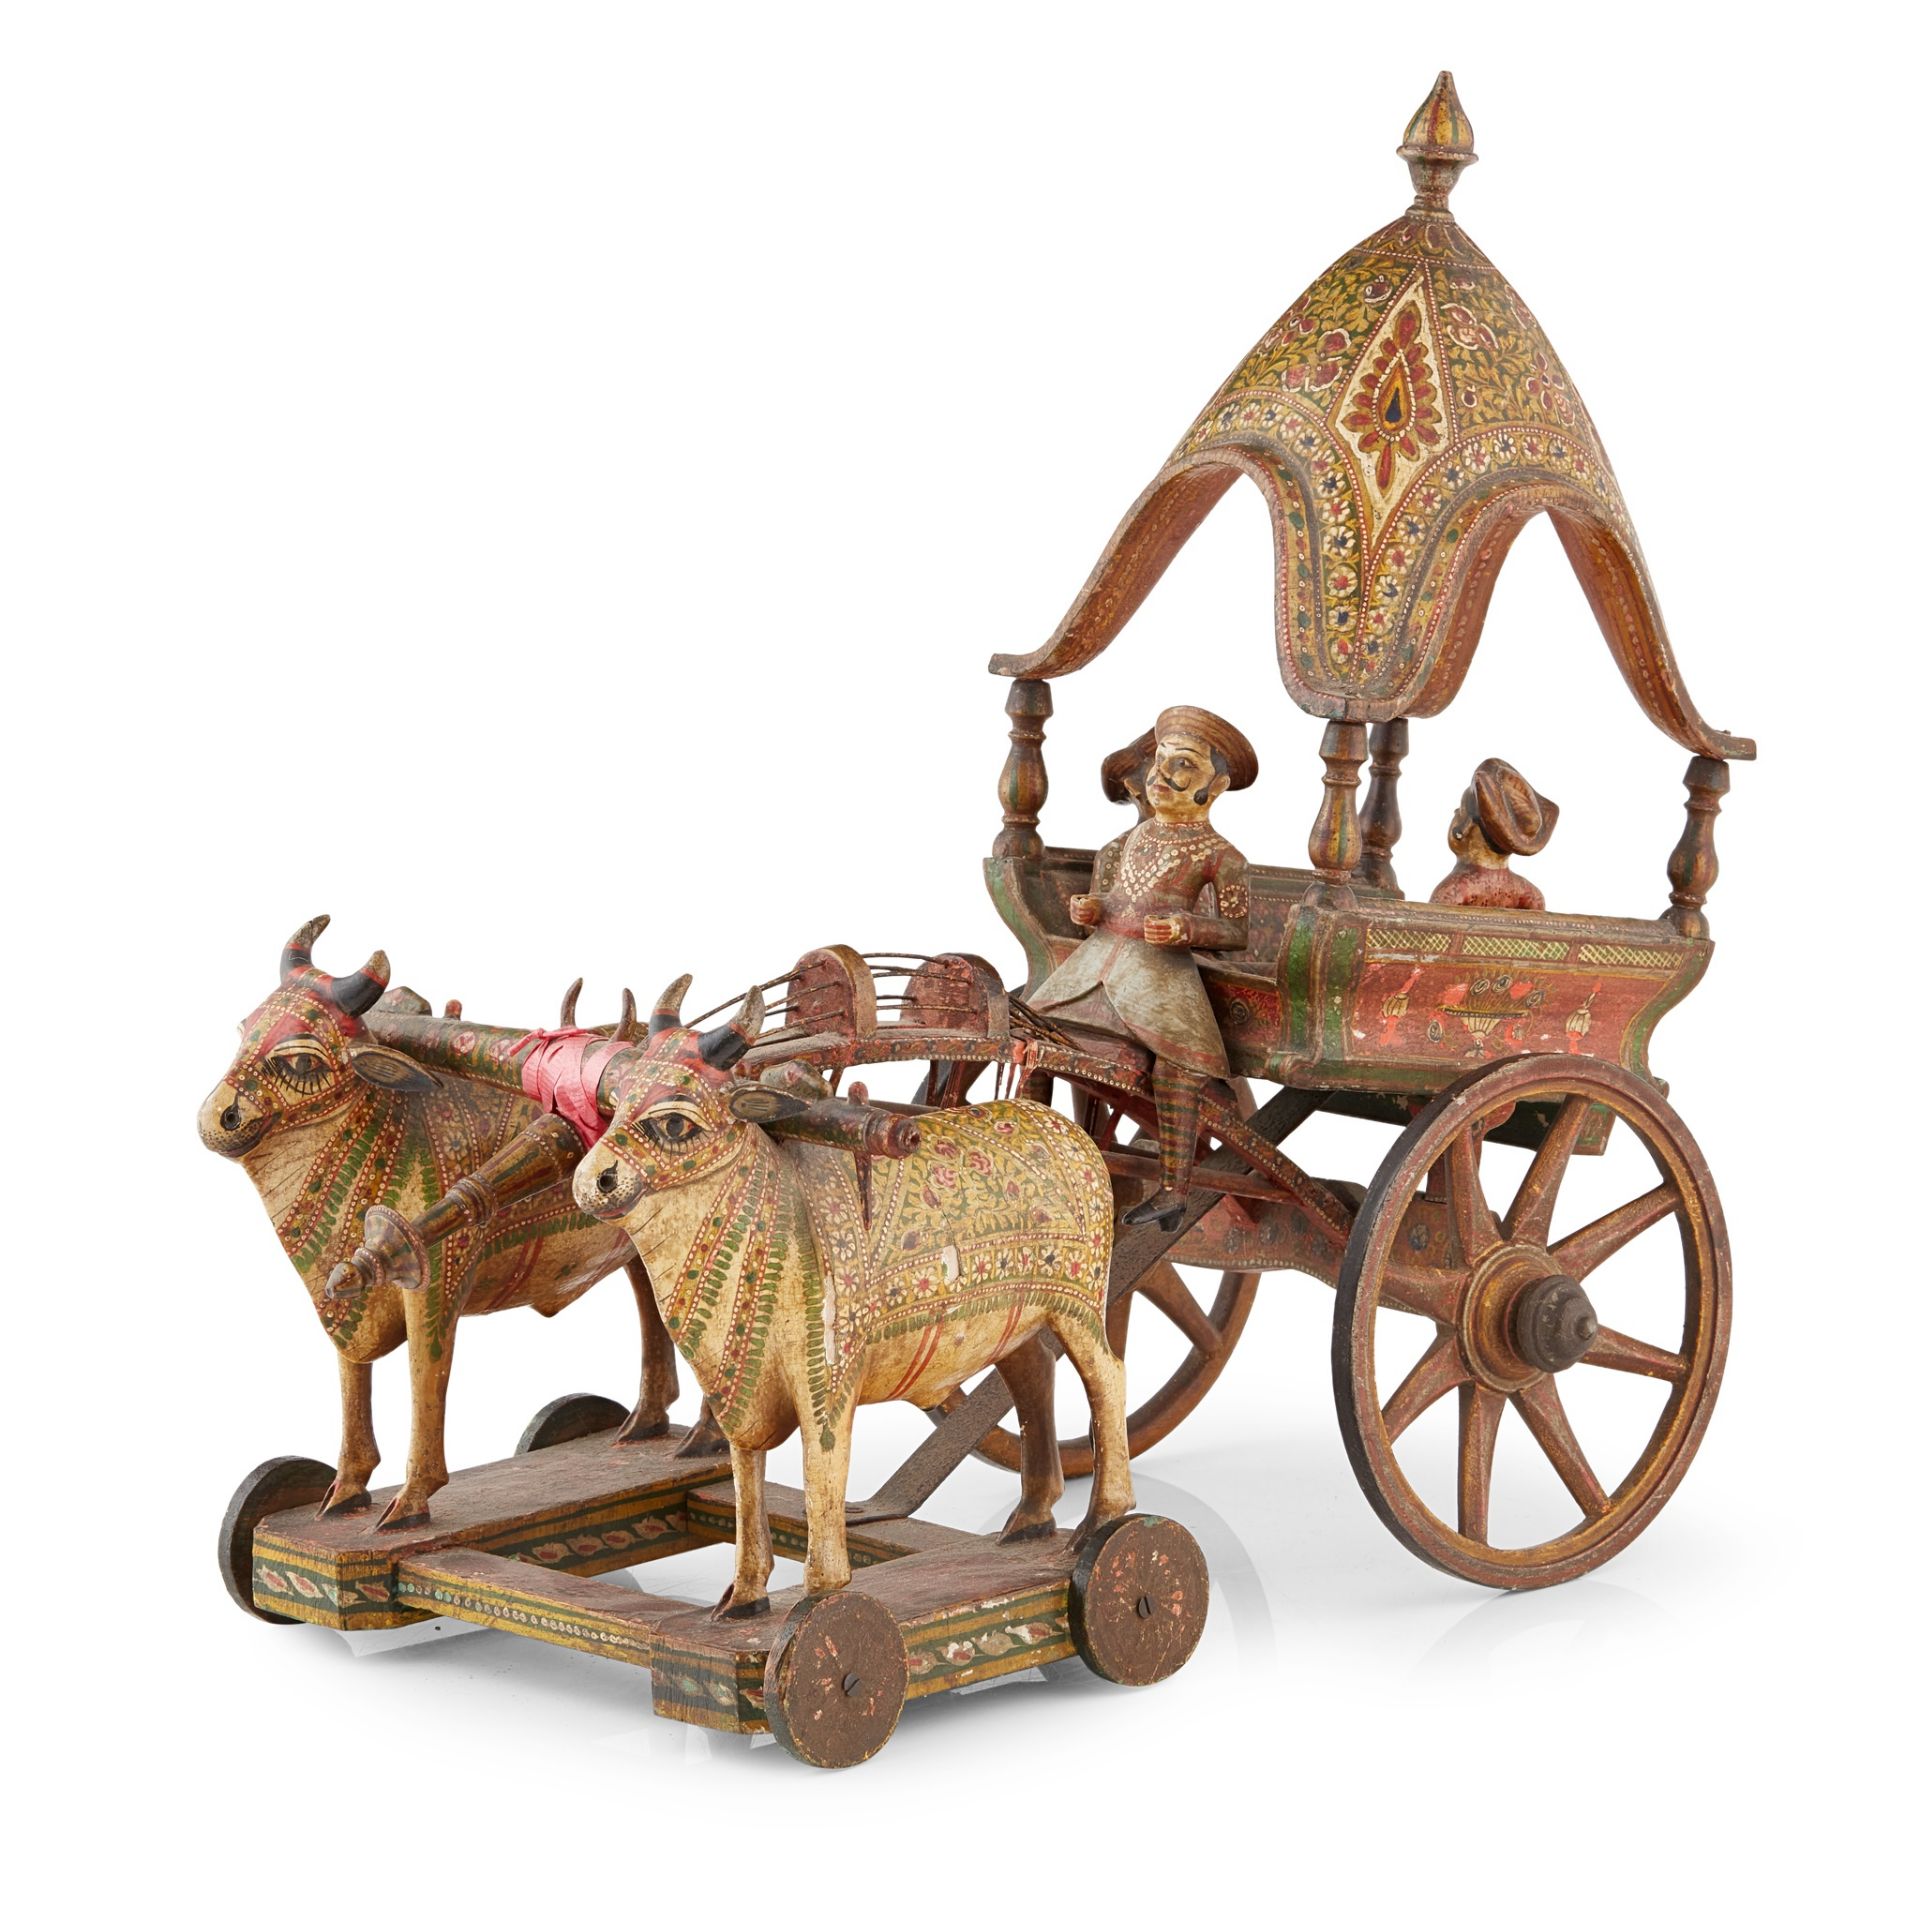 INDIAN POLYCHROME CARVED WOOD AND METAL MODEL OF A BULLOCK CART 19TH CENTURY